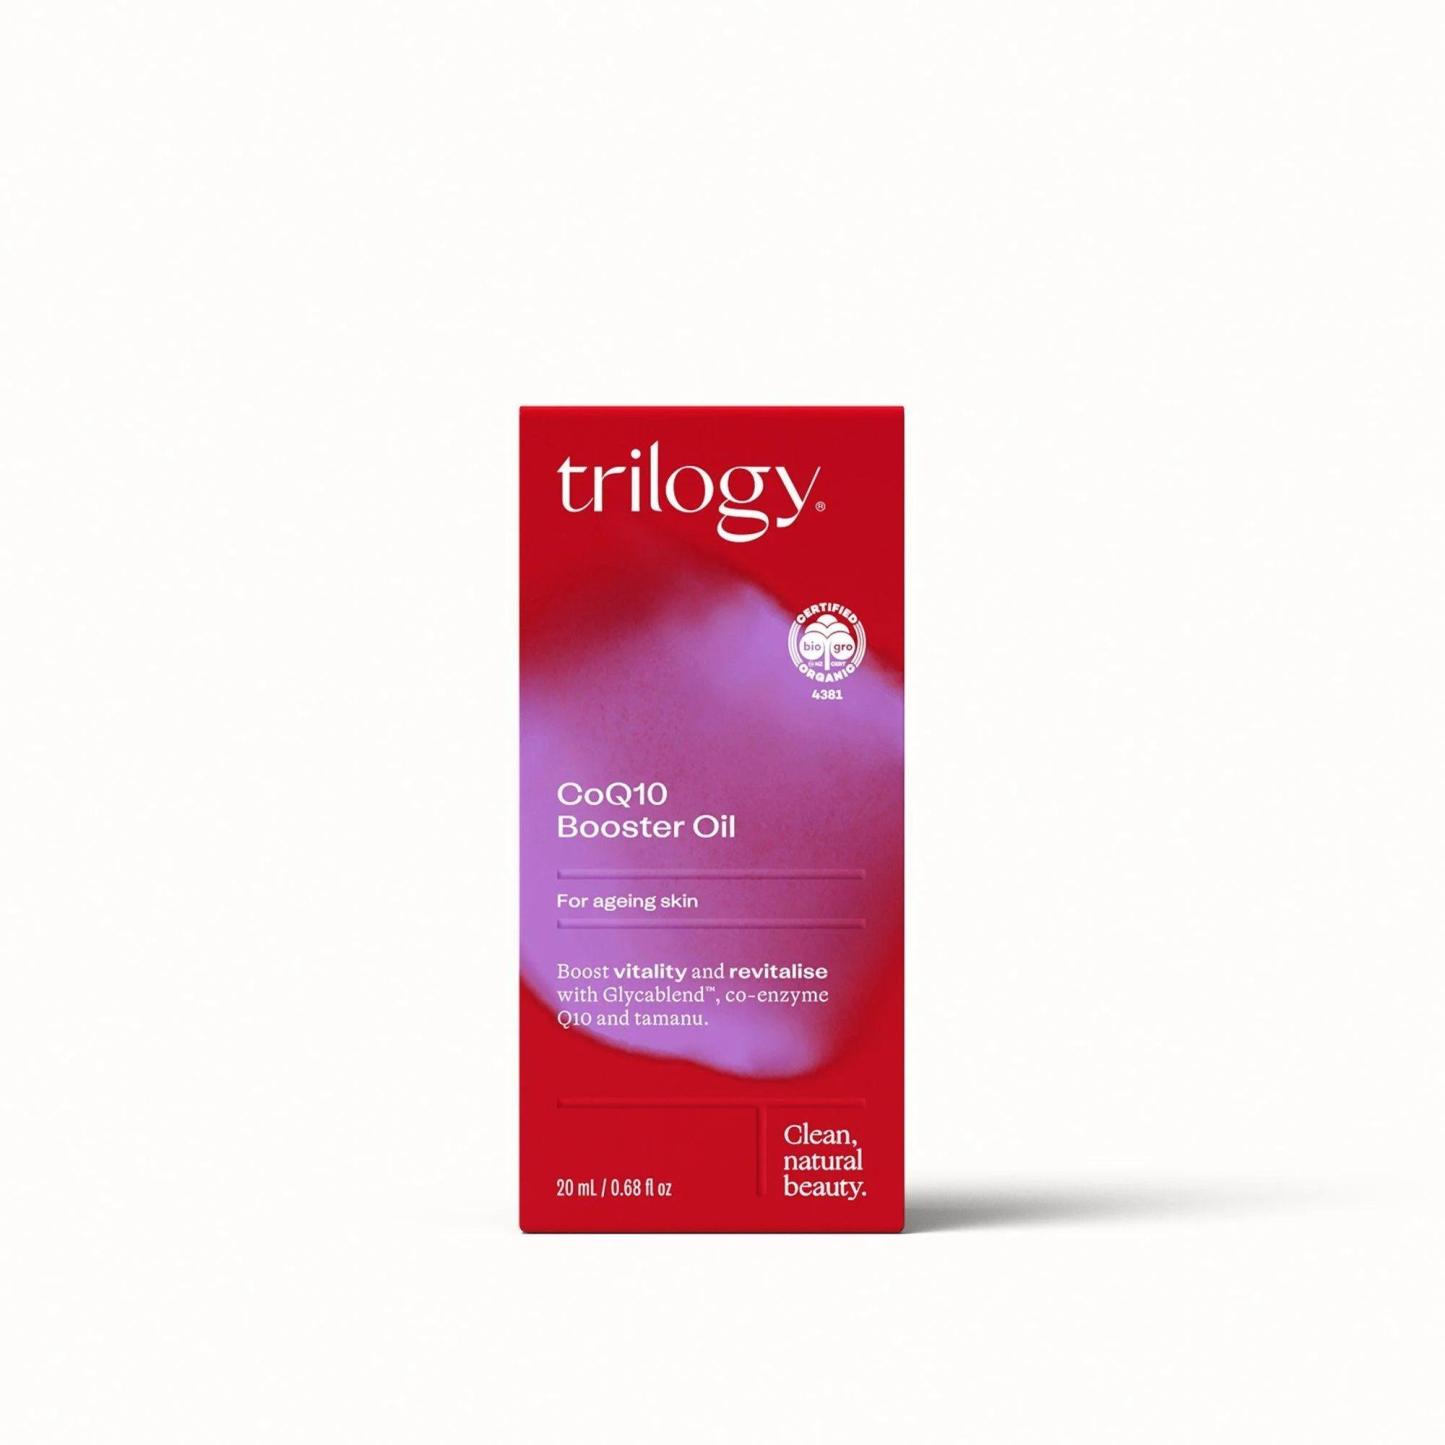 Trilogy Ageless CoQ10 Booster Oil 20ml by Love Nature